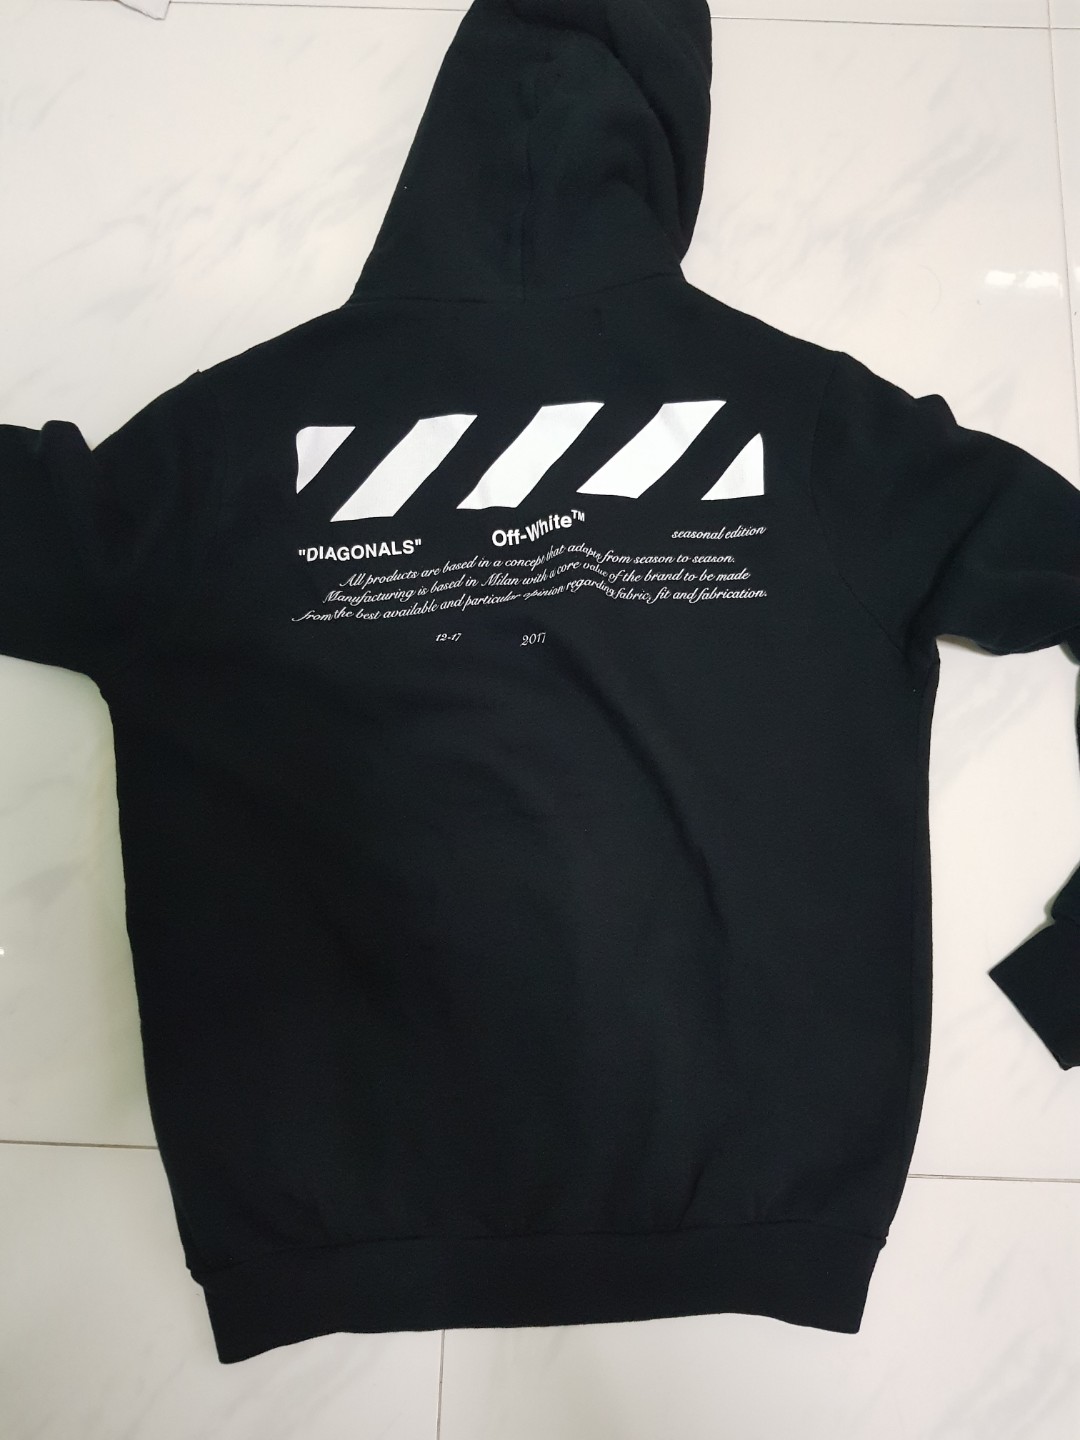 Off White For All hoodie 